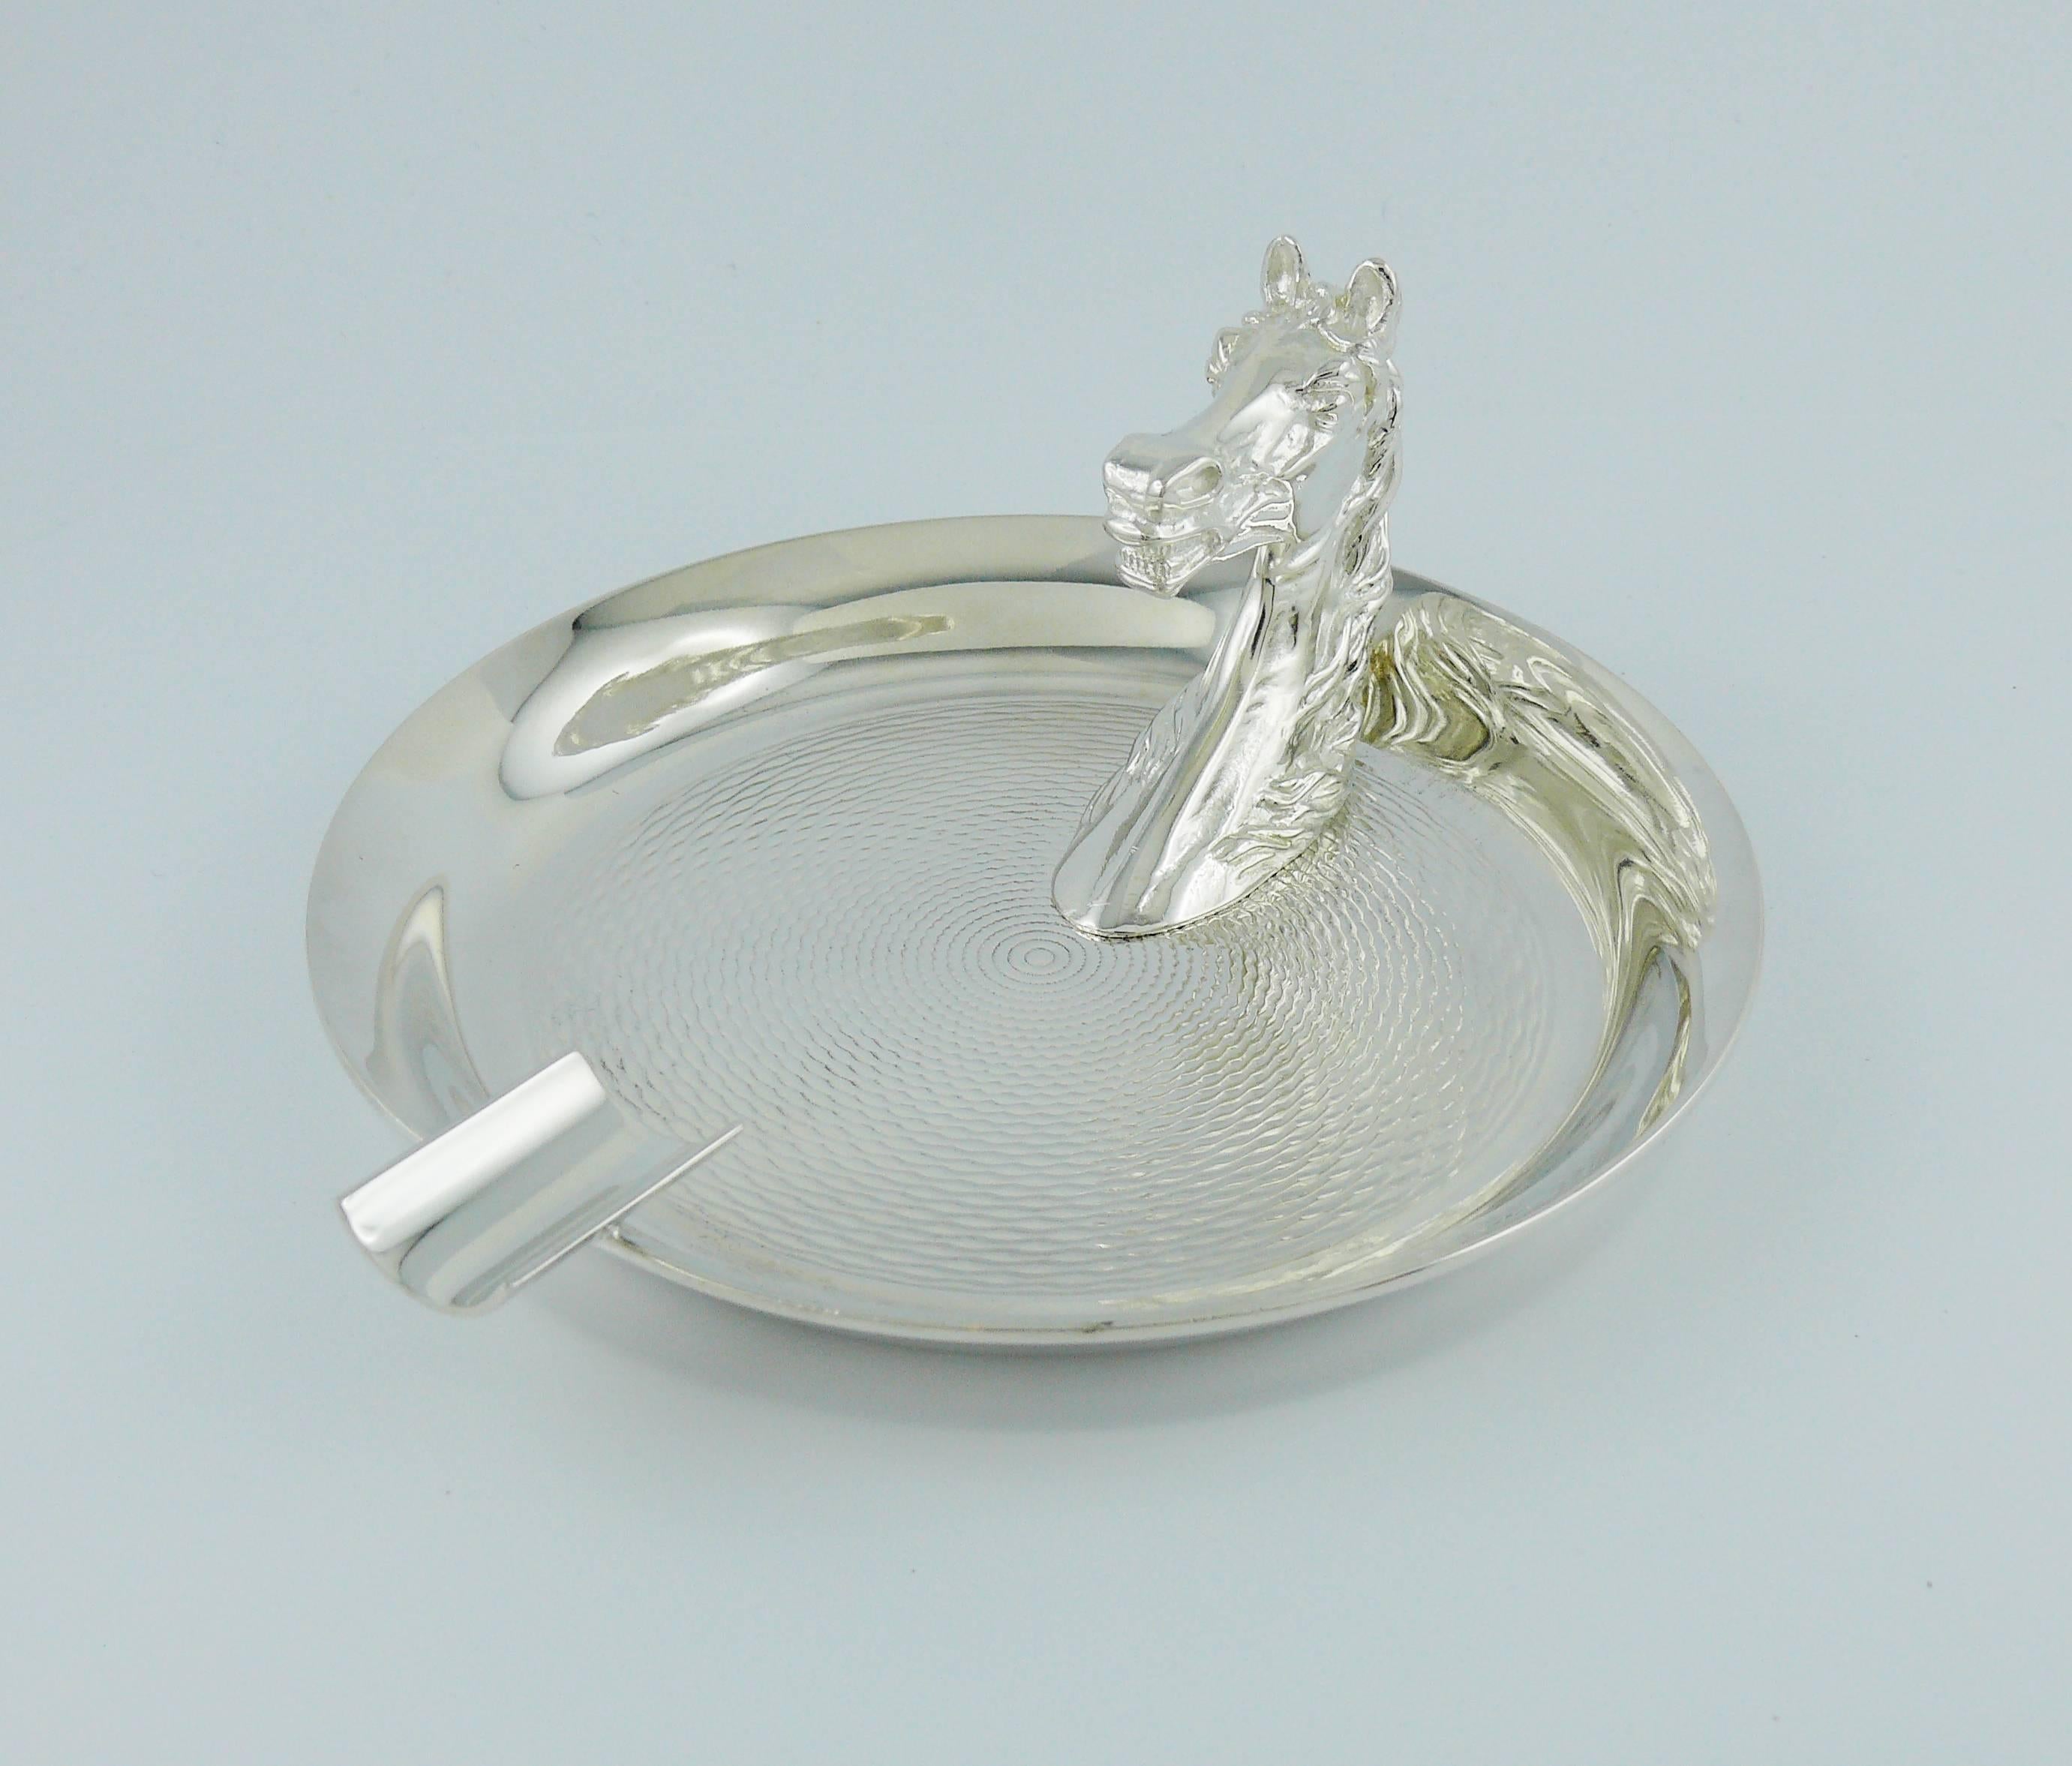 HERMES vintage silver plated horse head equestrian ashtray.

Marked HERMES Paris.
Maker's hallmark.

Indicative measurements : diameter approx. 12 cm (4.72 inches) / horse head height approx. 5 cm (1.97 inches).

CONDITION CHART
- New or never worn